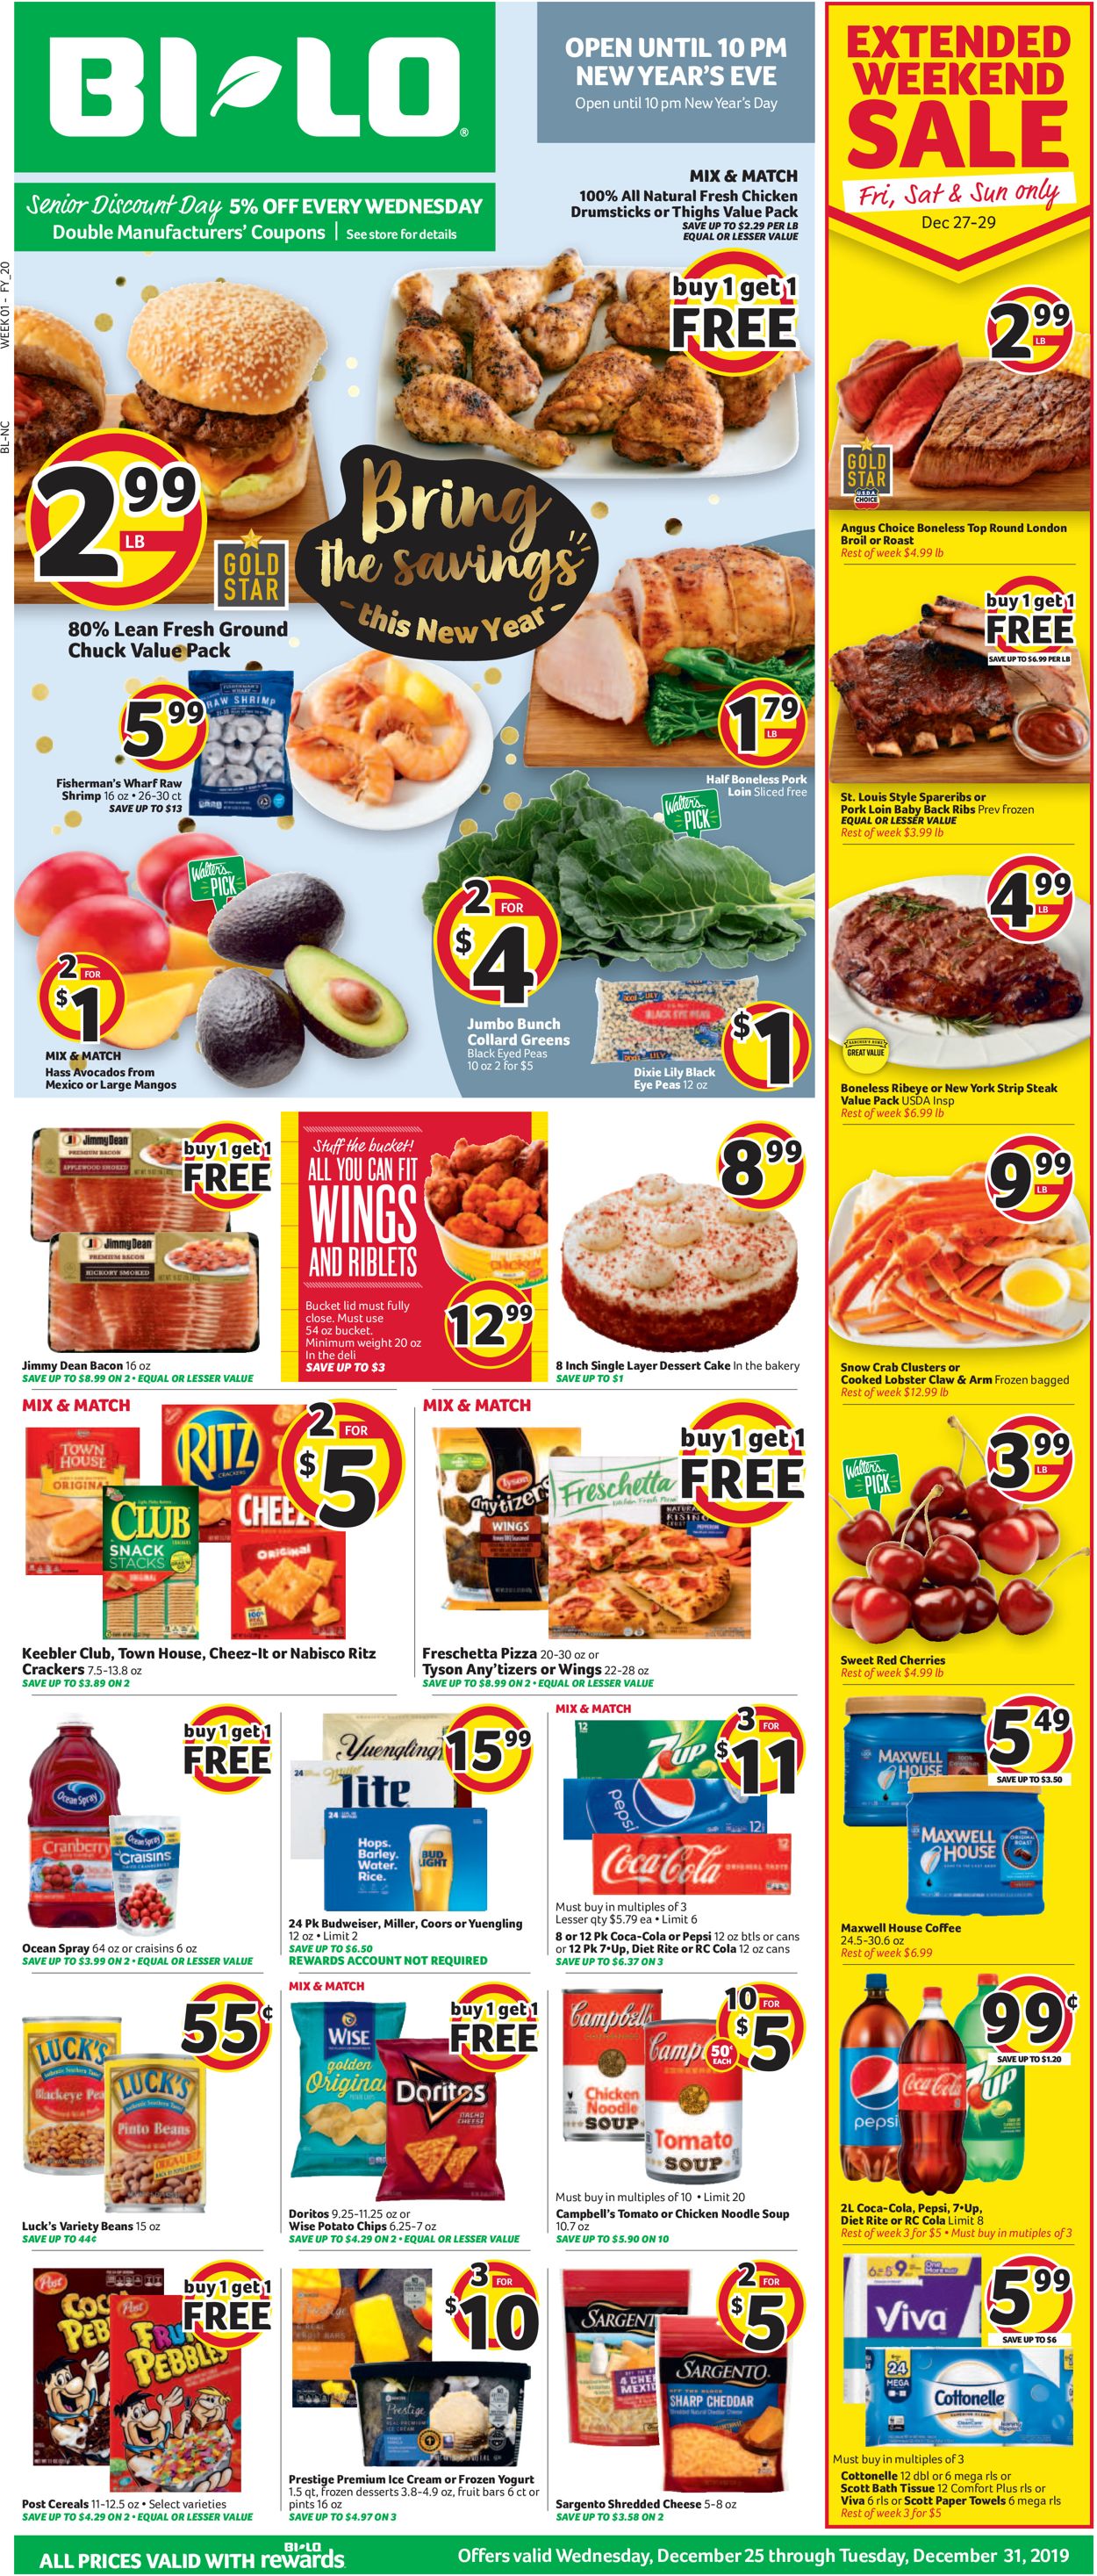 BI-LO Current weekly ad 12/25 - 12/31/2019 - frequent-ads.com